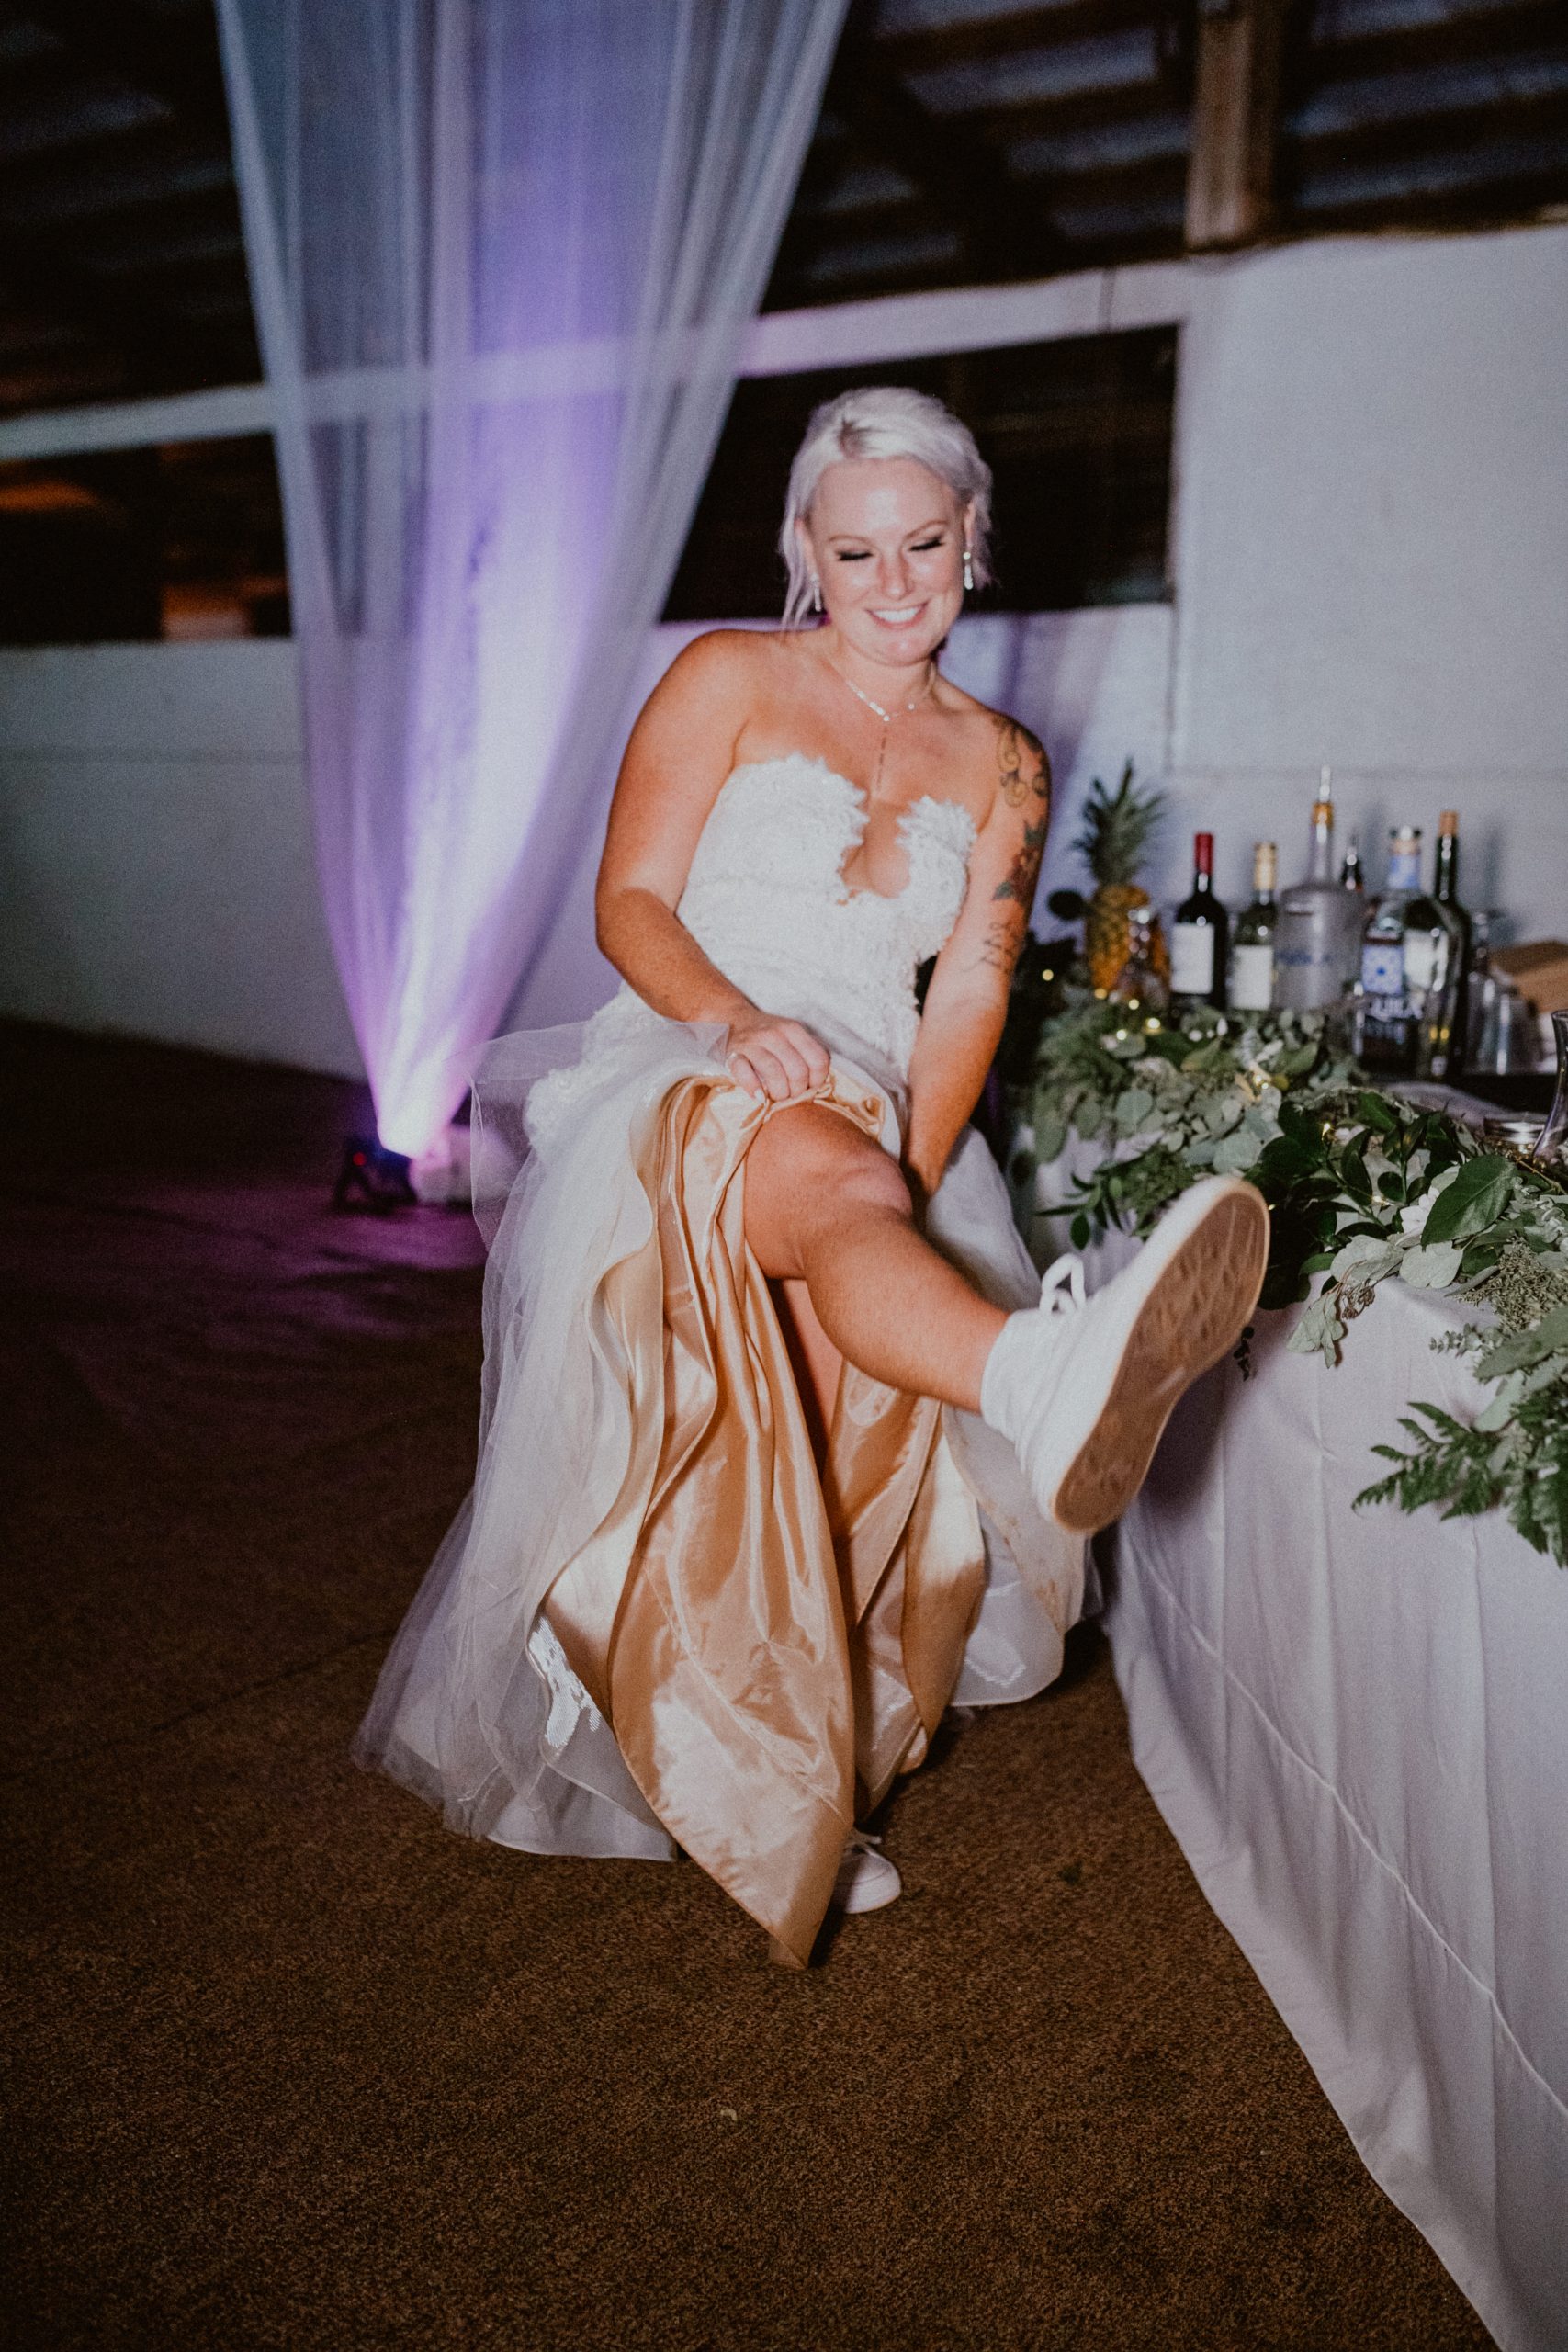 Bride shows off comfy wedding day converse sneakers in front of the bar while wearing her mermaid style wedding dress | Oahu Wedding Photographer, Oahu Elopement Photographer, Destination Wedding Photographer, Destination Elopement Photographer, Newlywed moments ideas, Newlywed Photography inspiration, Hawaii Elopement ideas | chelseaabril.com